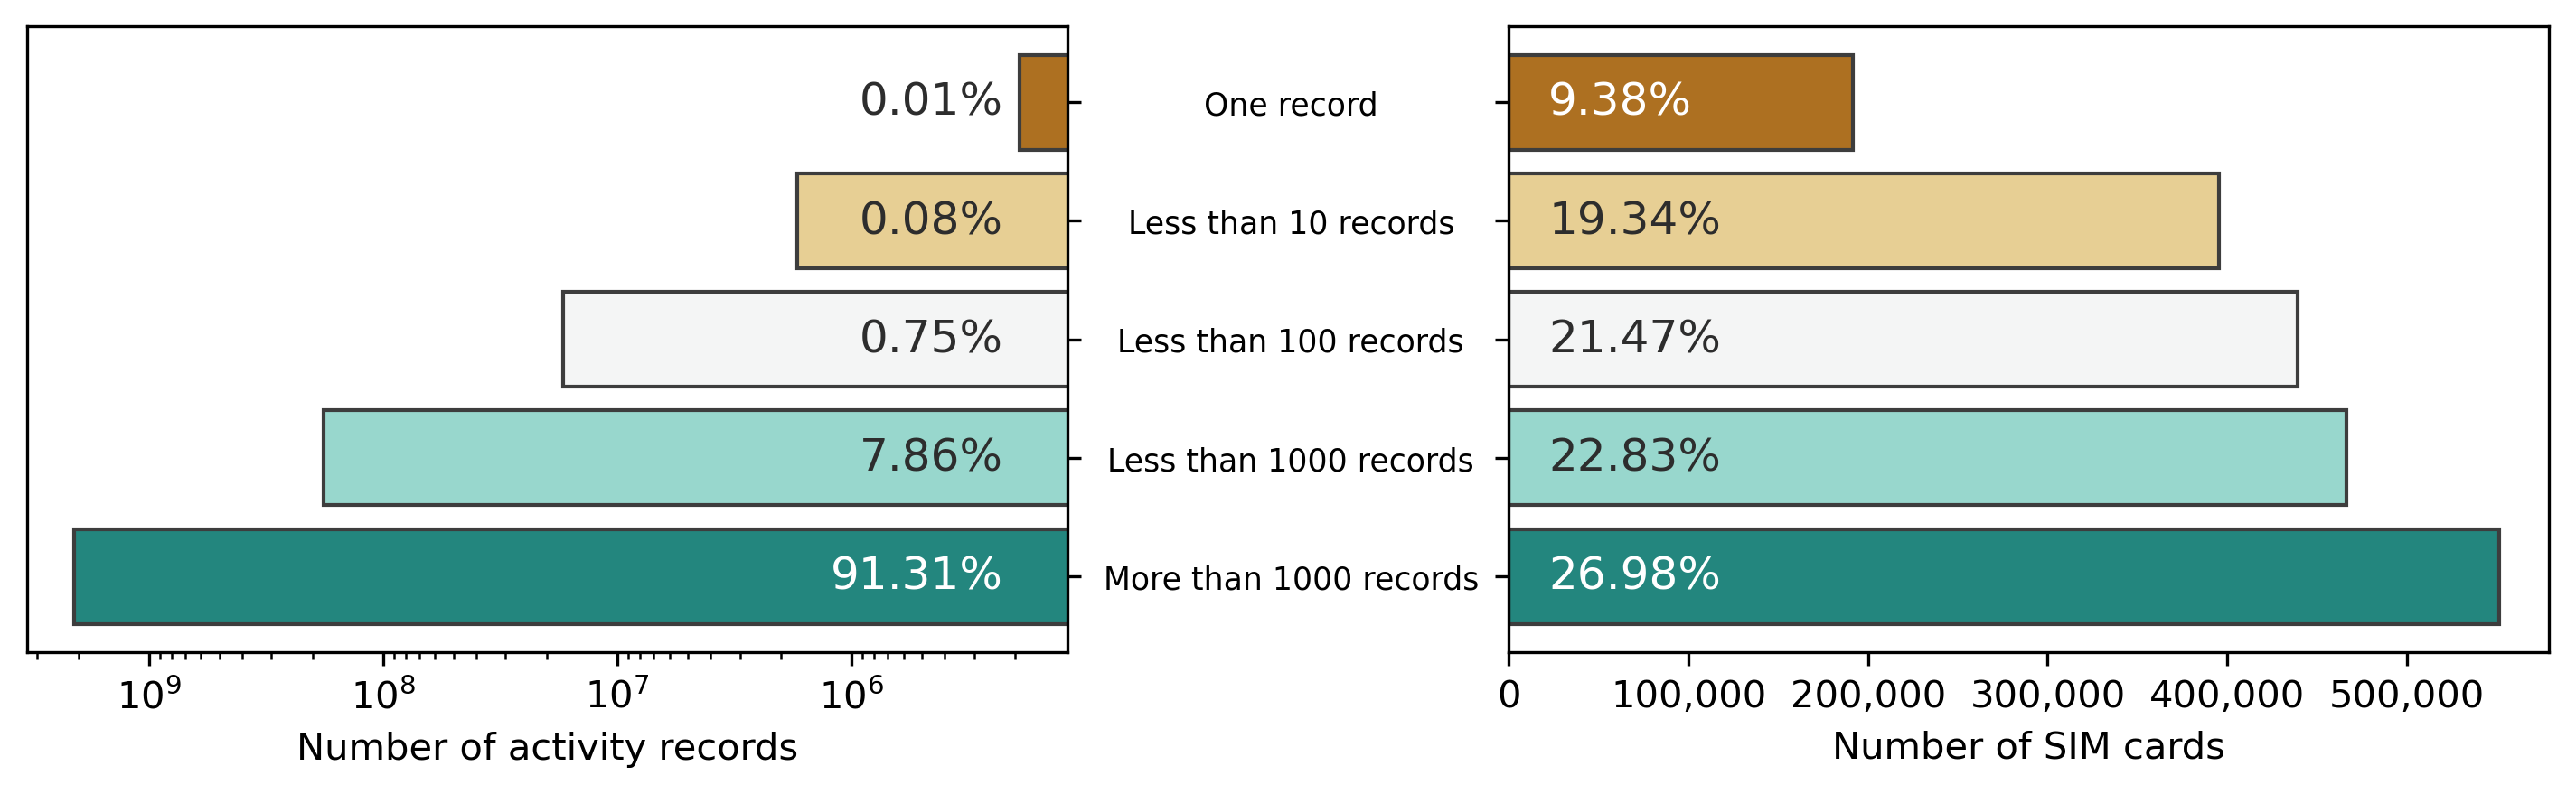 Subscriber Identity Module cards in the 2016-06 data set categorized by the number of activity records.     The Subscriber Identity Module cards with more than 1000 activity records (26.98% of the Subscriber Identity Module cards) provide the majority (91.31%) of the activity.